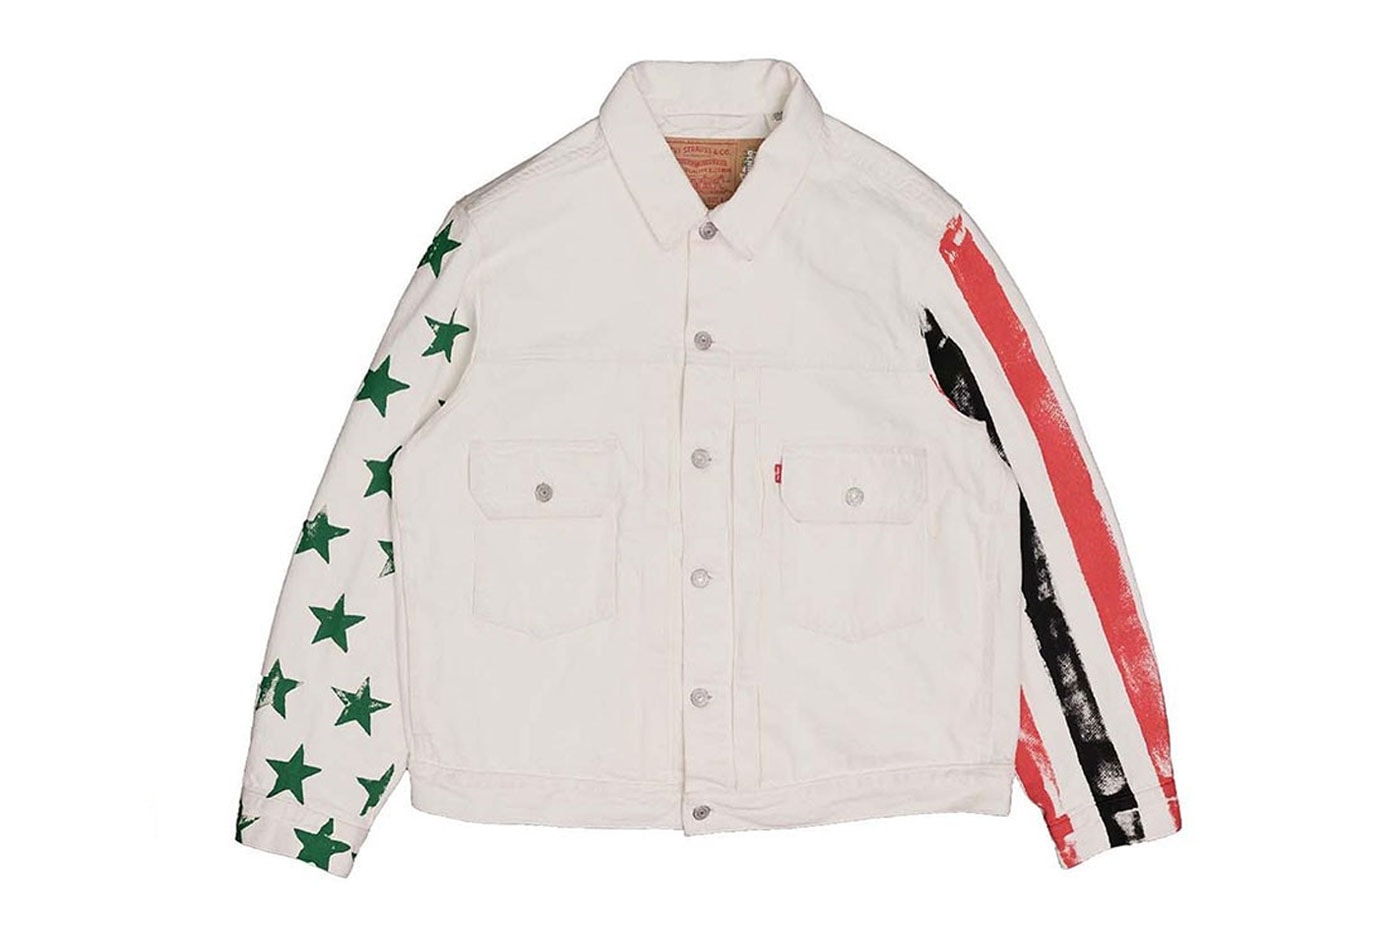 CPFM Denim Tears Jimi Hendrix Independence Day July 4 The Star-Spangled Banner Levis cactus plant flea market american flag jeans jackets green black red release info date price